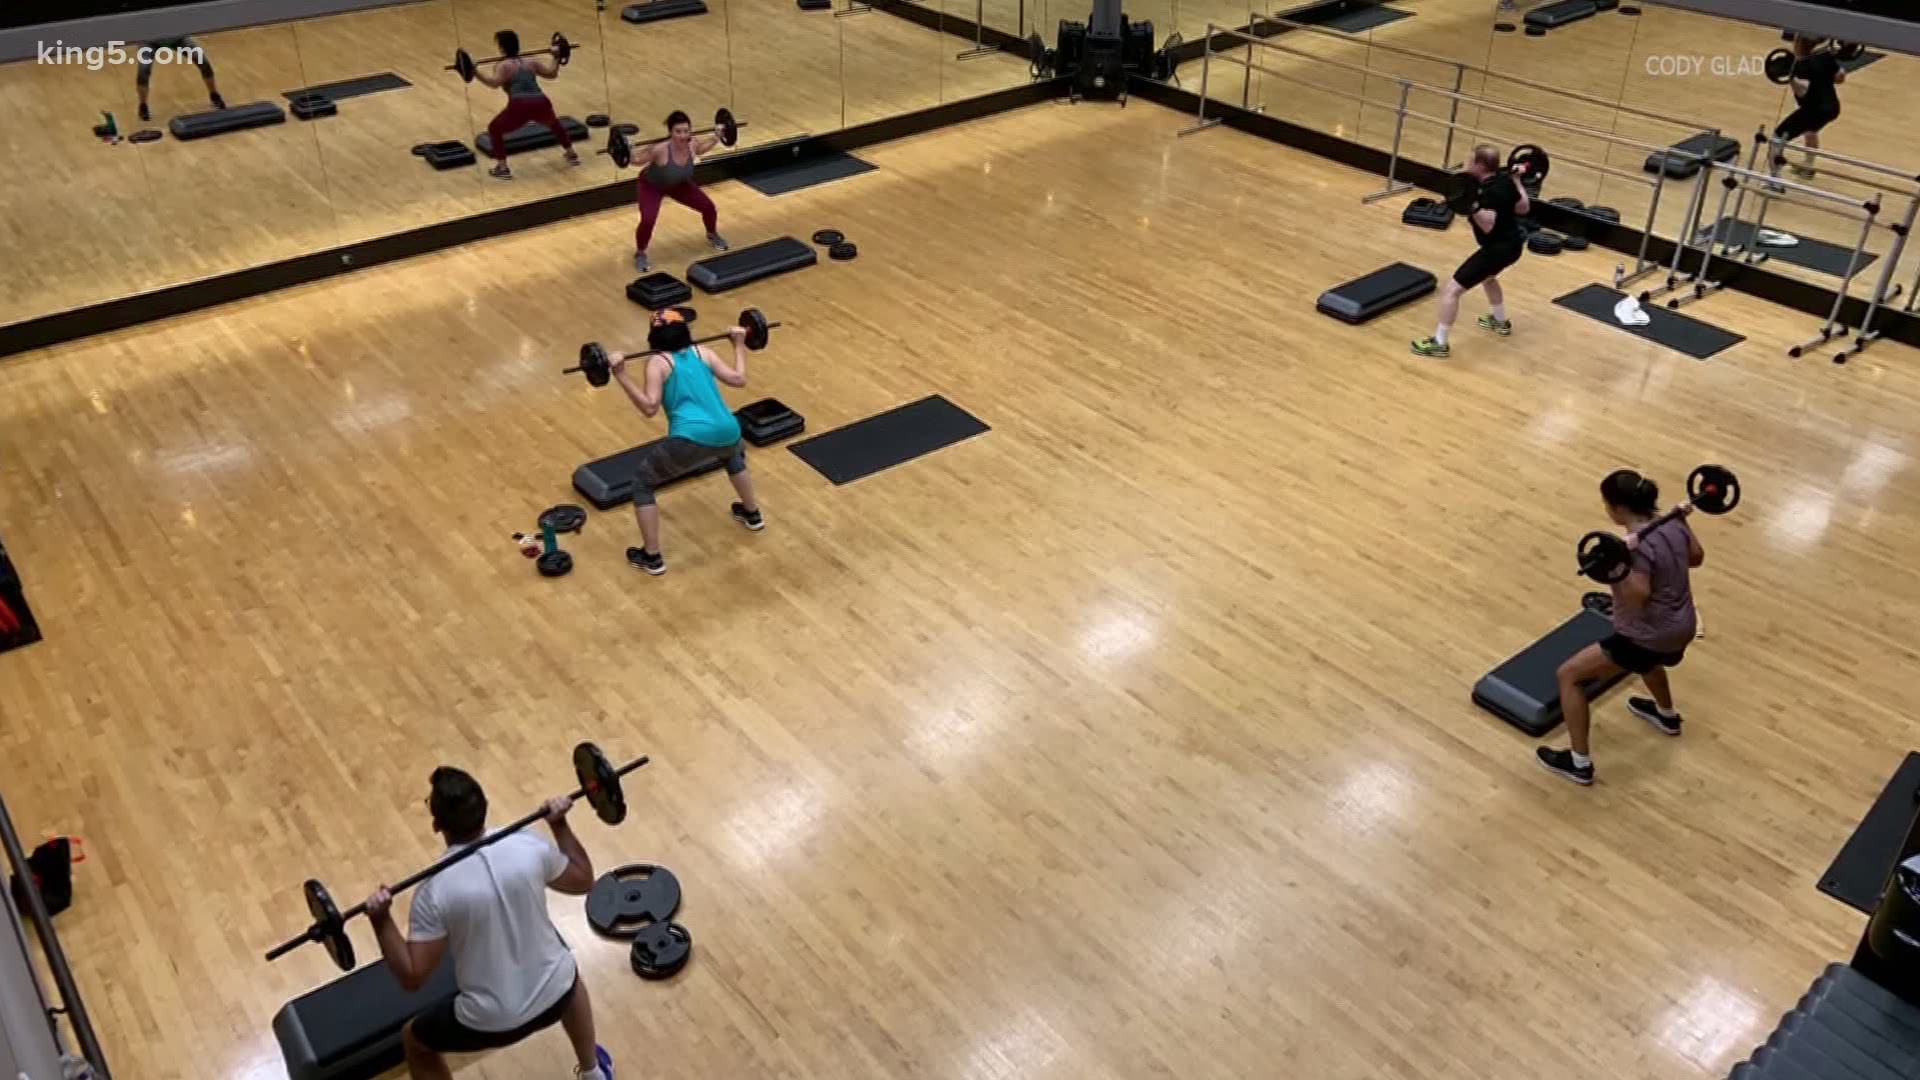 New guidelines on gyms, fitness centers in Washington has owners and members frustrated